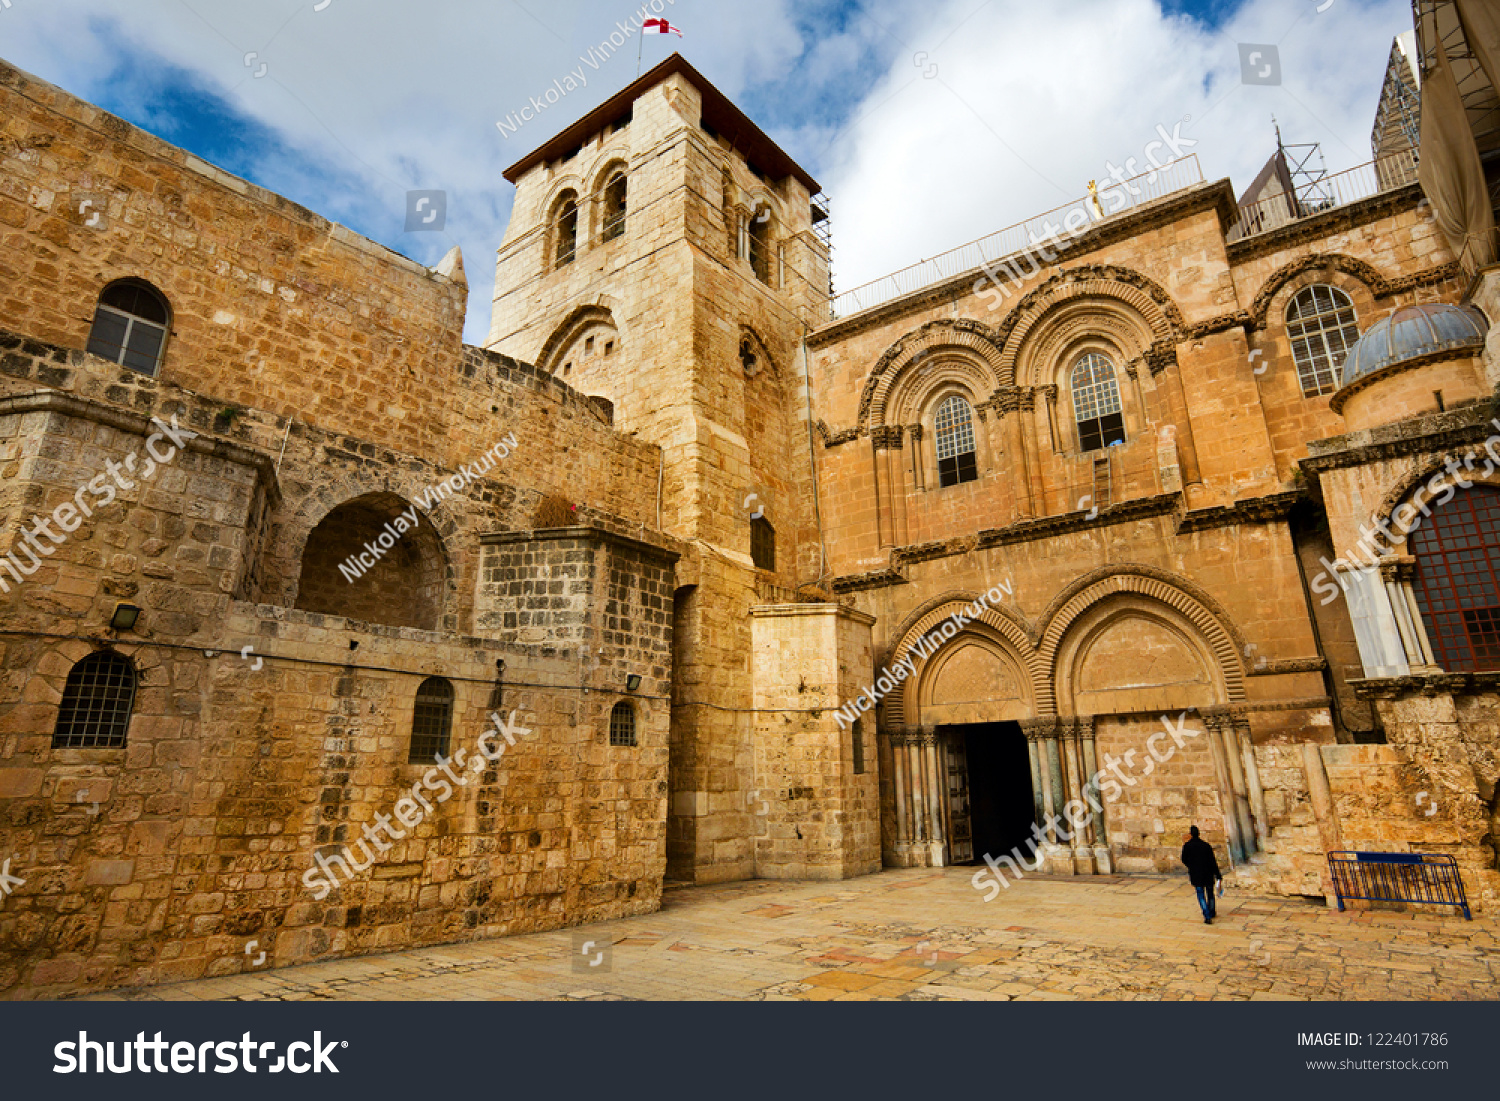 Vew on main entrance in at the Church of the Holy Sepulchre in Old City of Jerusalem #122401786